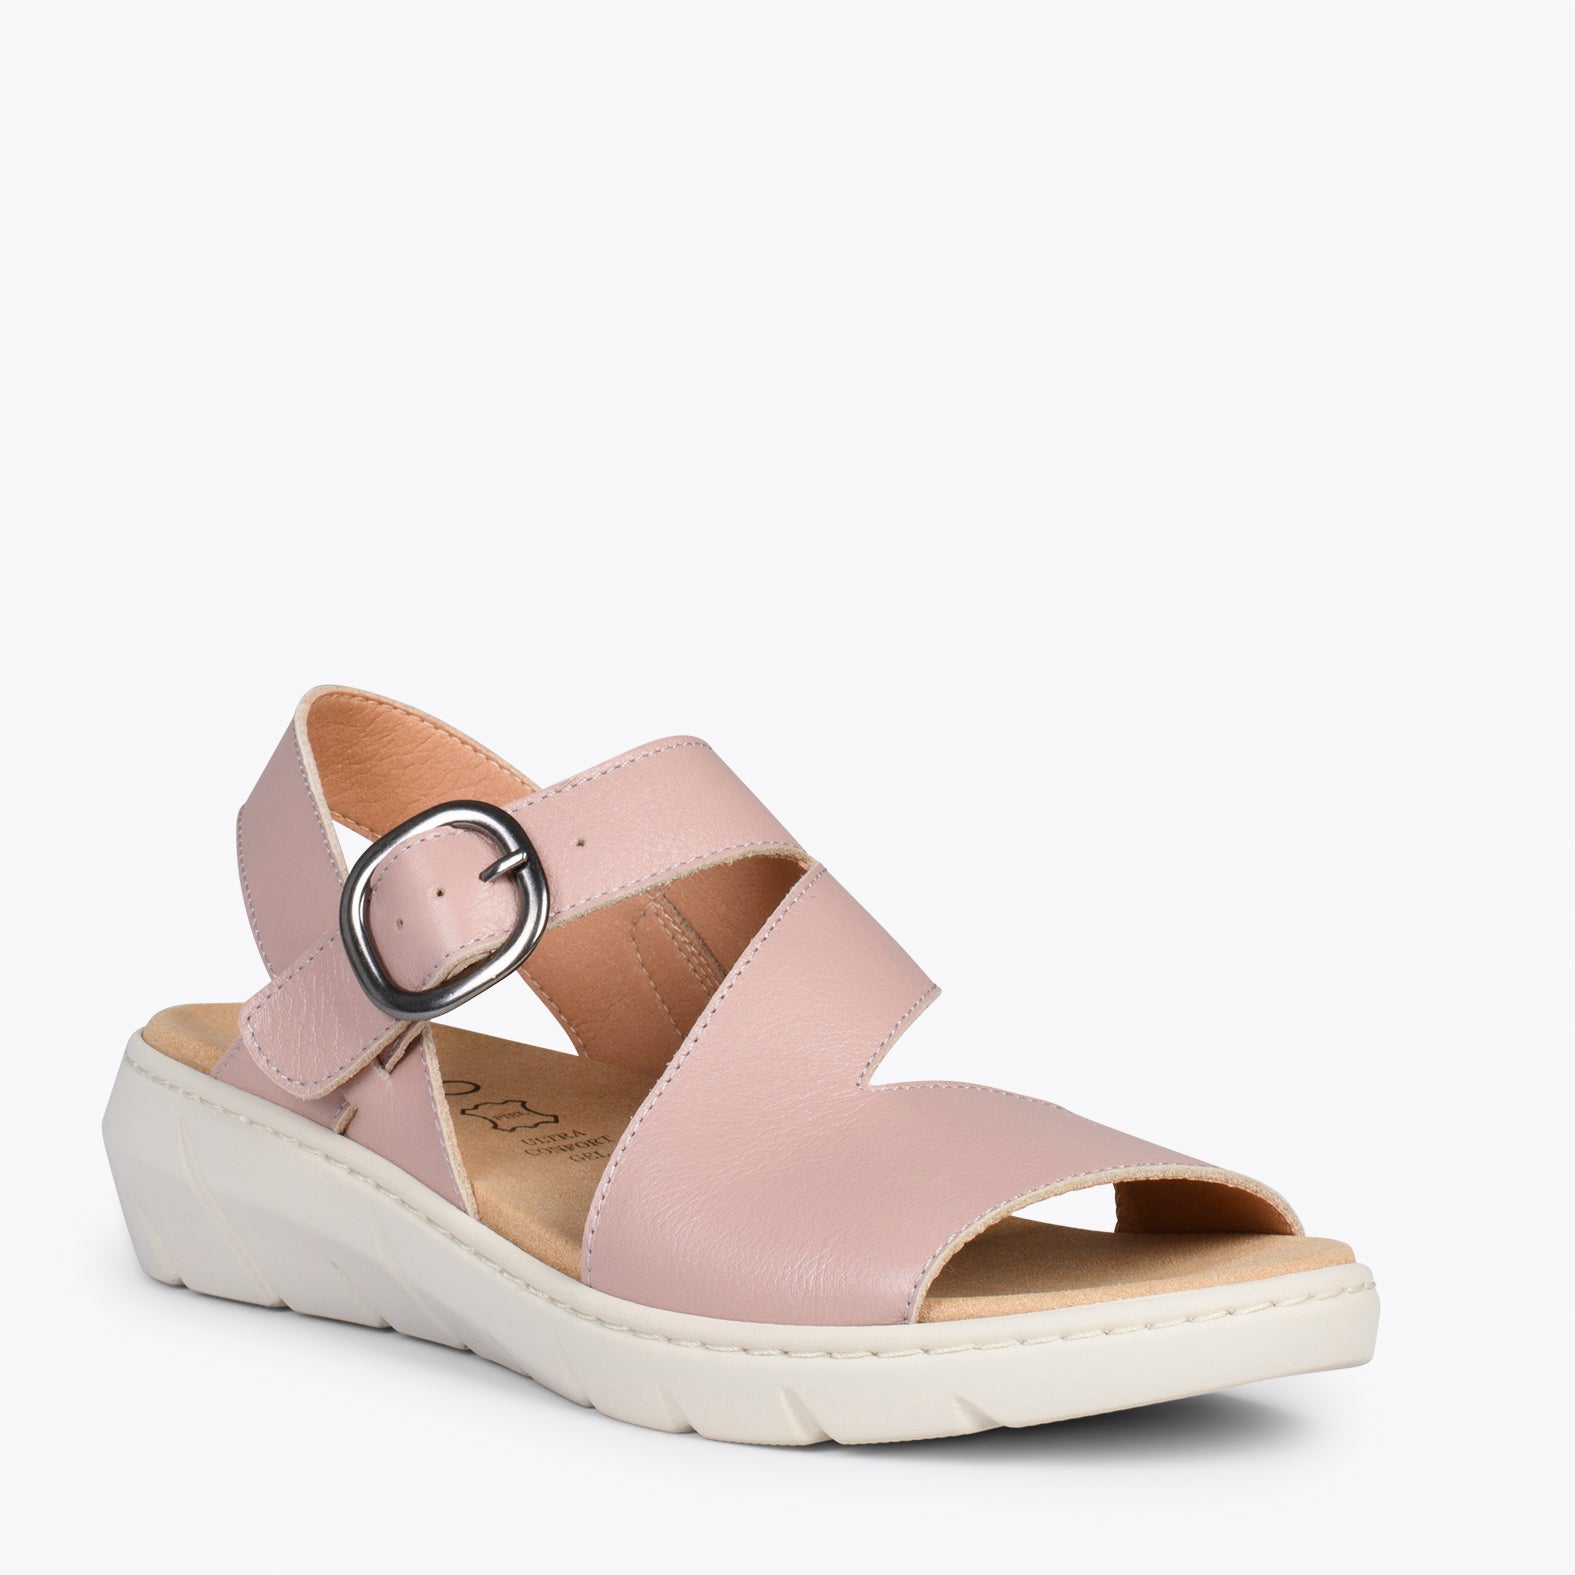 NATURA – PINK sandals with removable insole – miMaO EUROPA